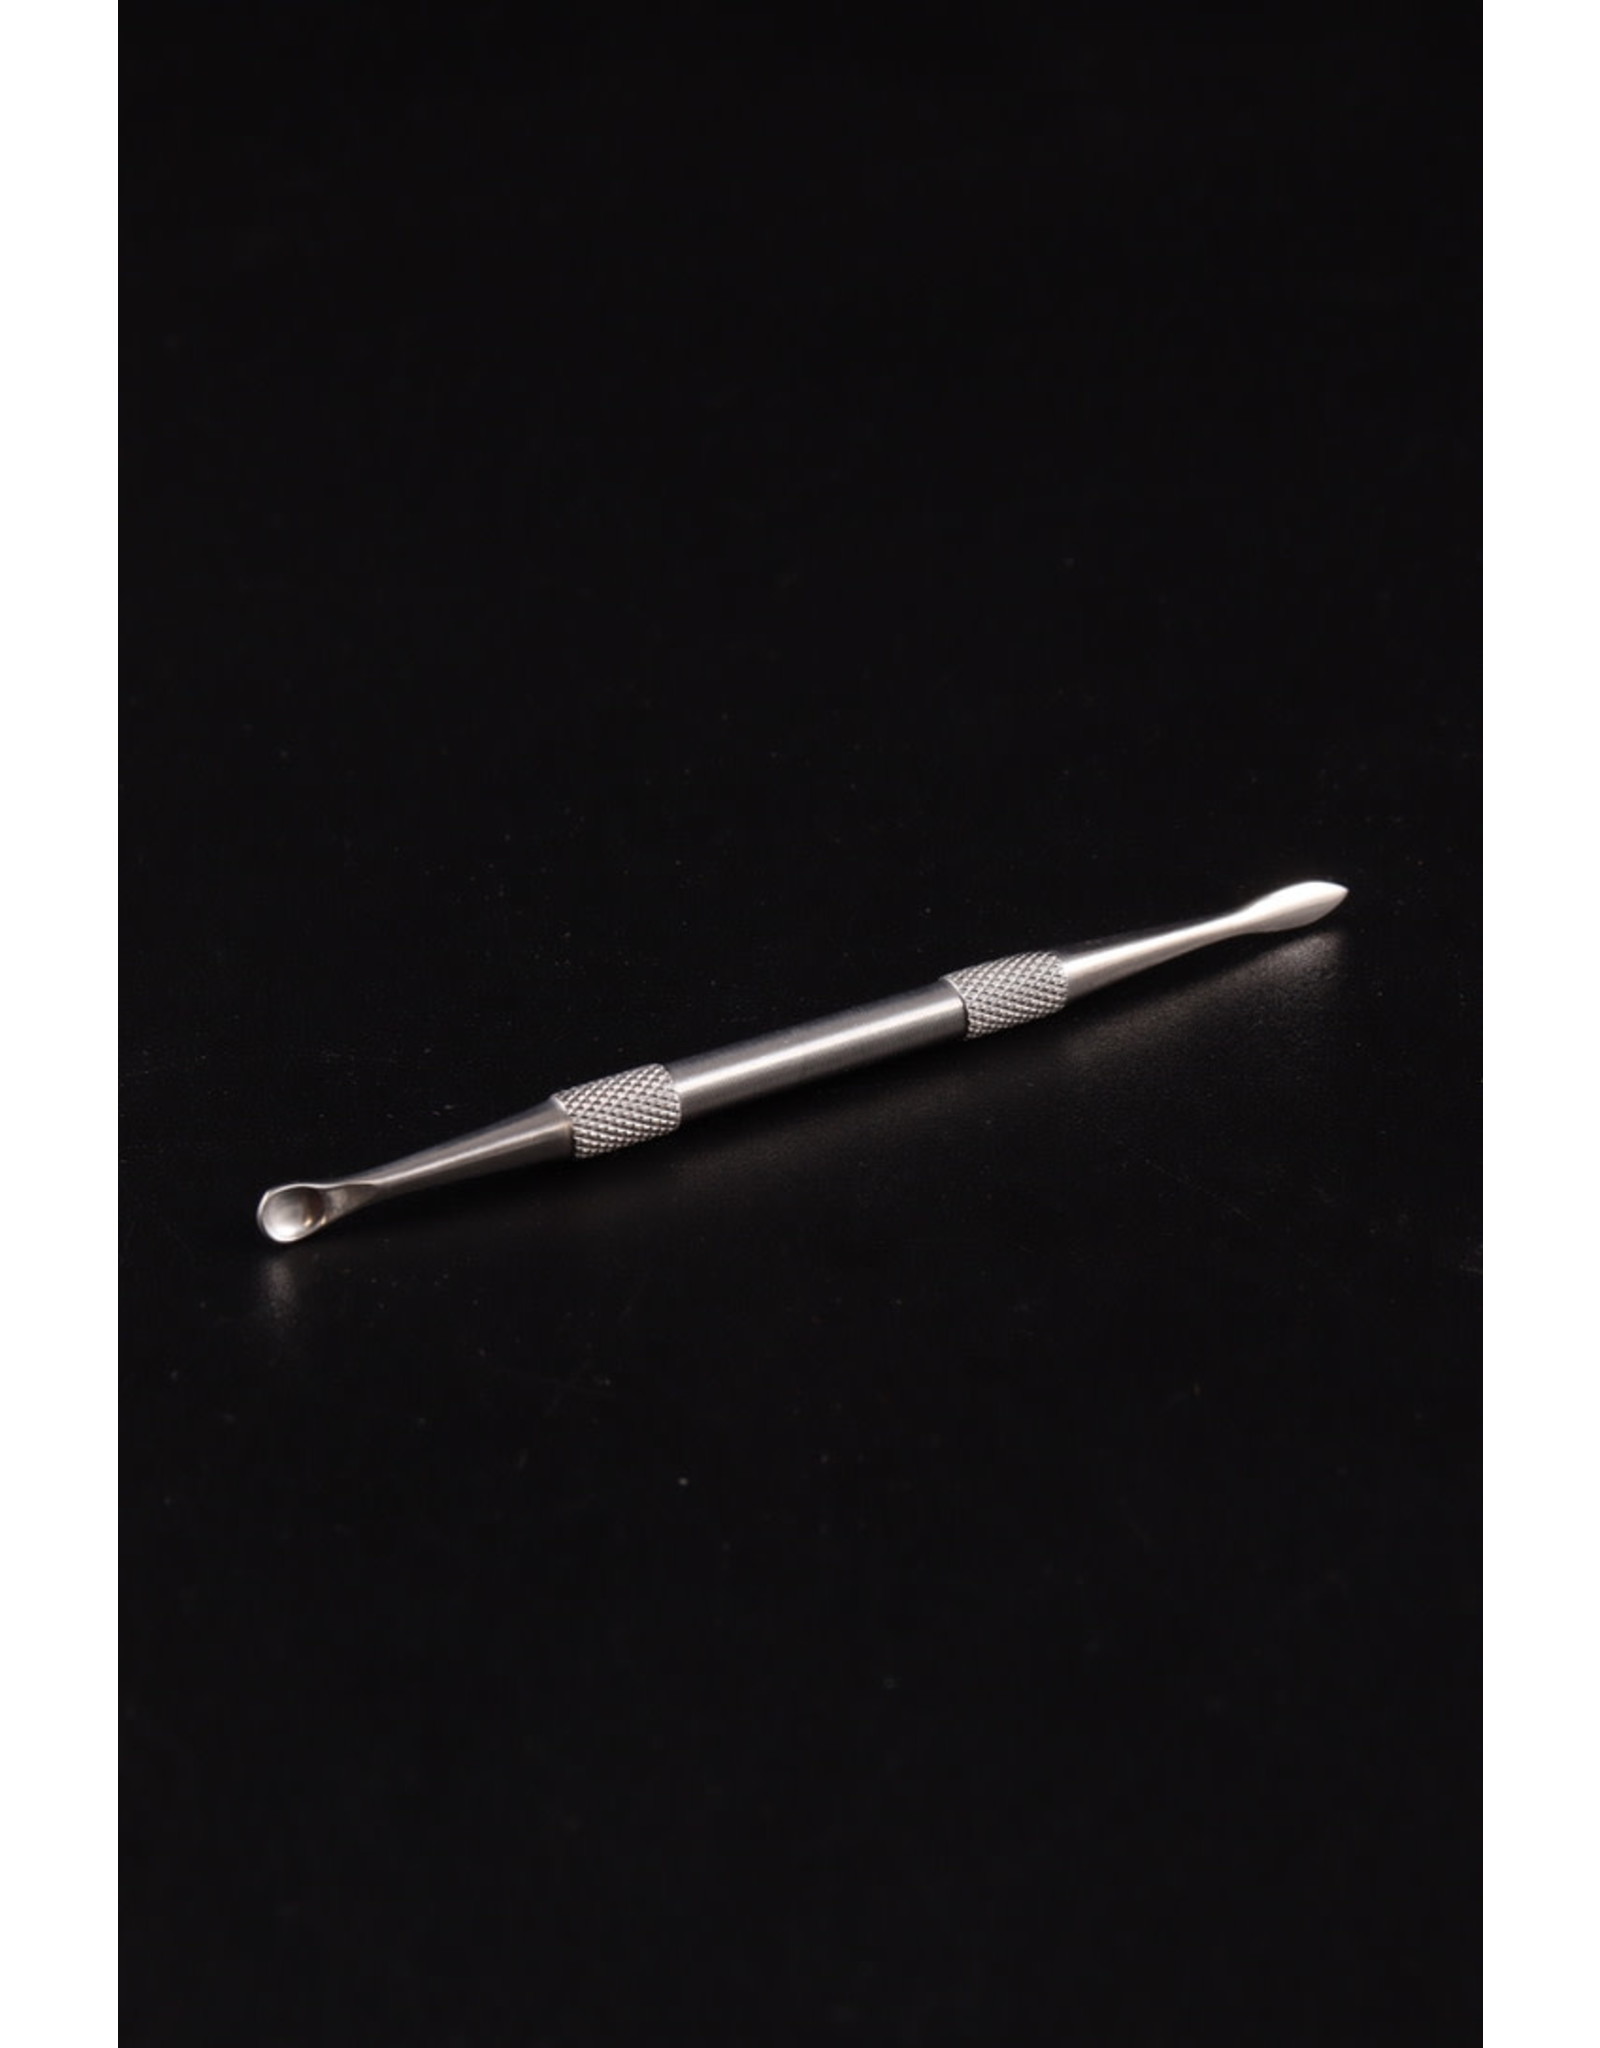 DAW 4 Inch Metal Double Ended Dabber Tool